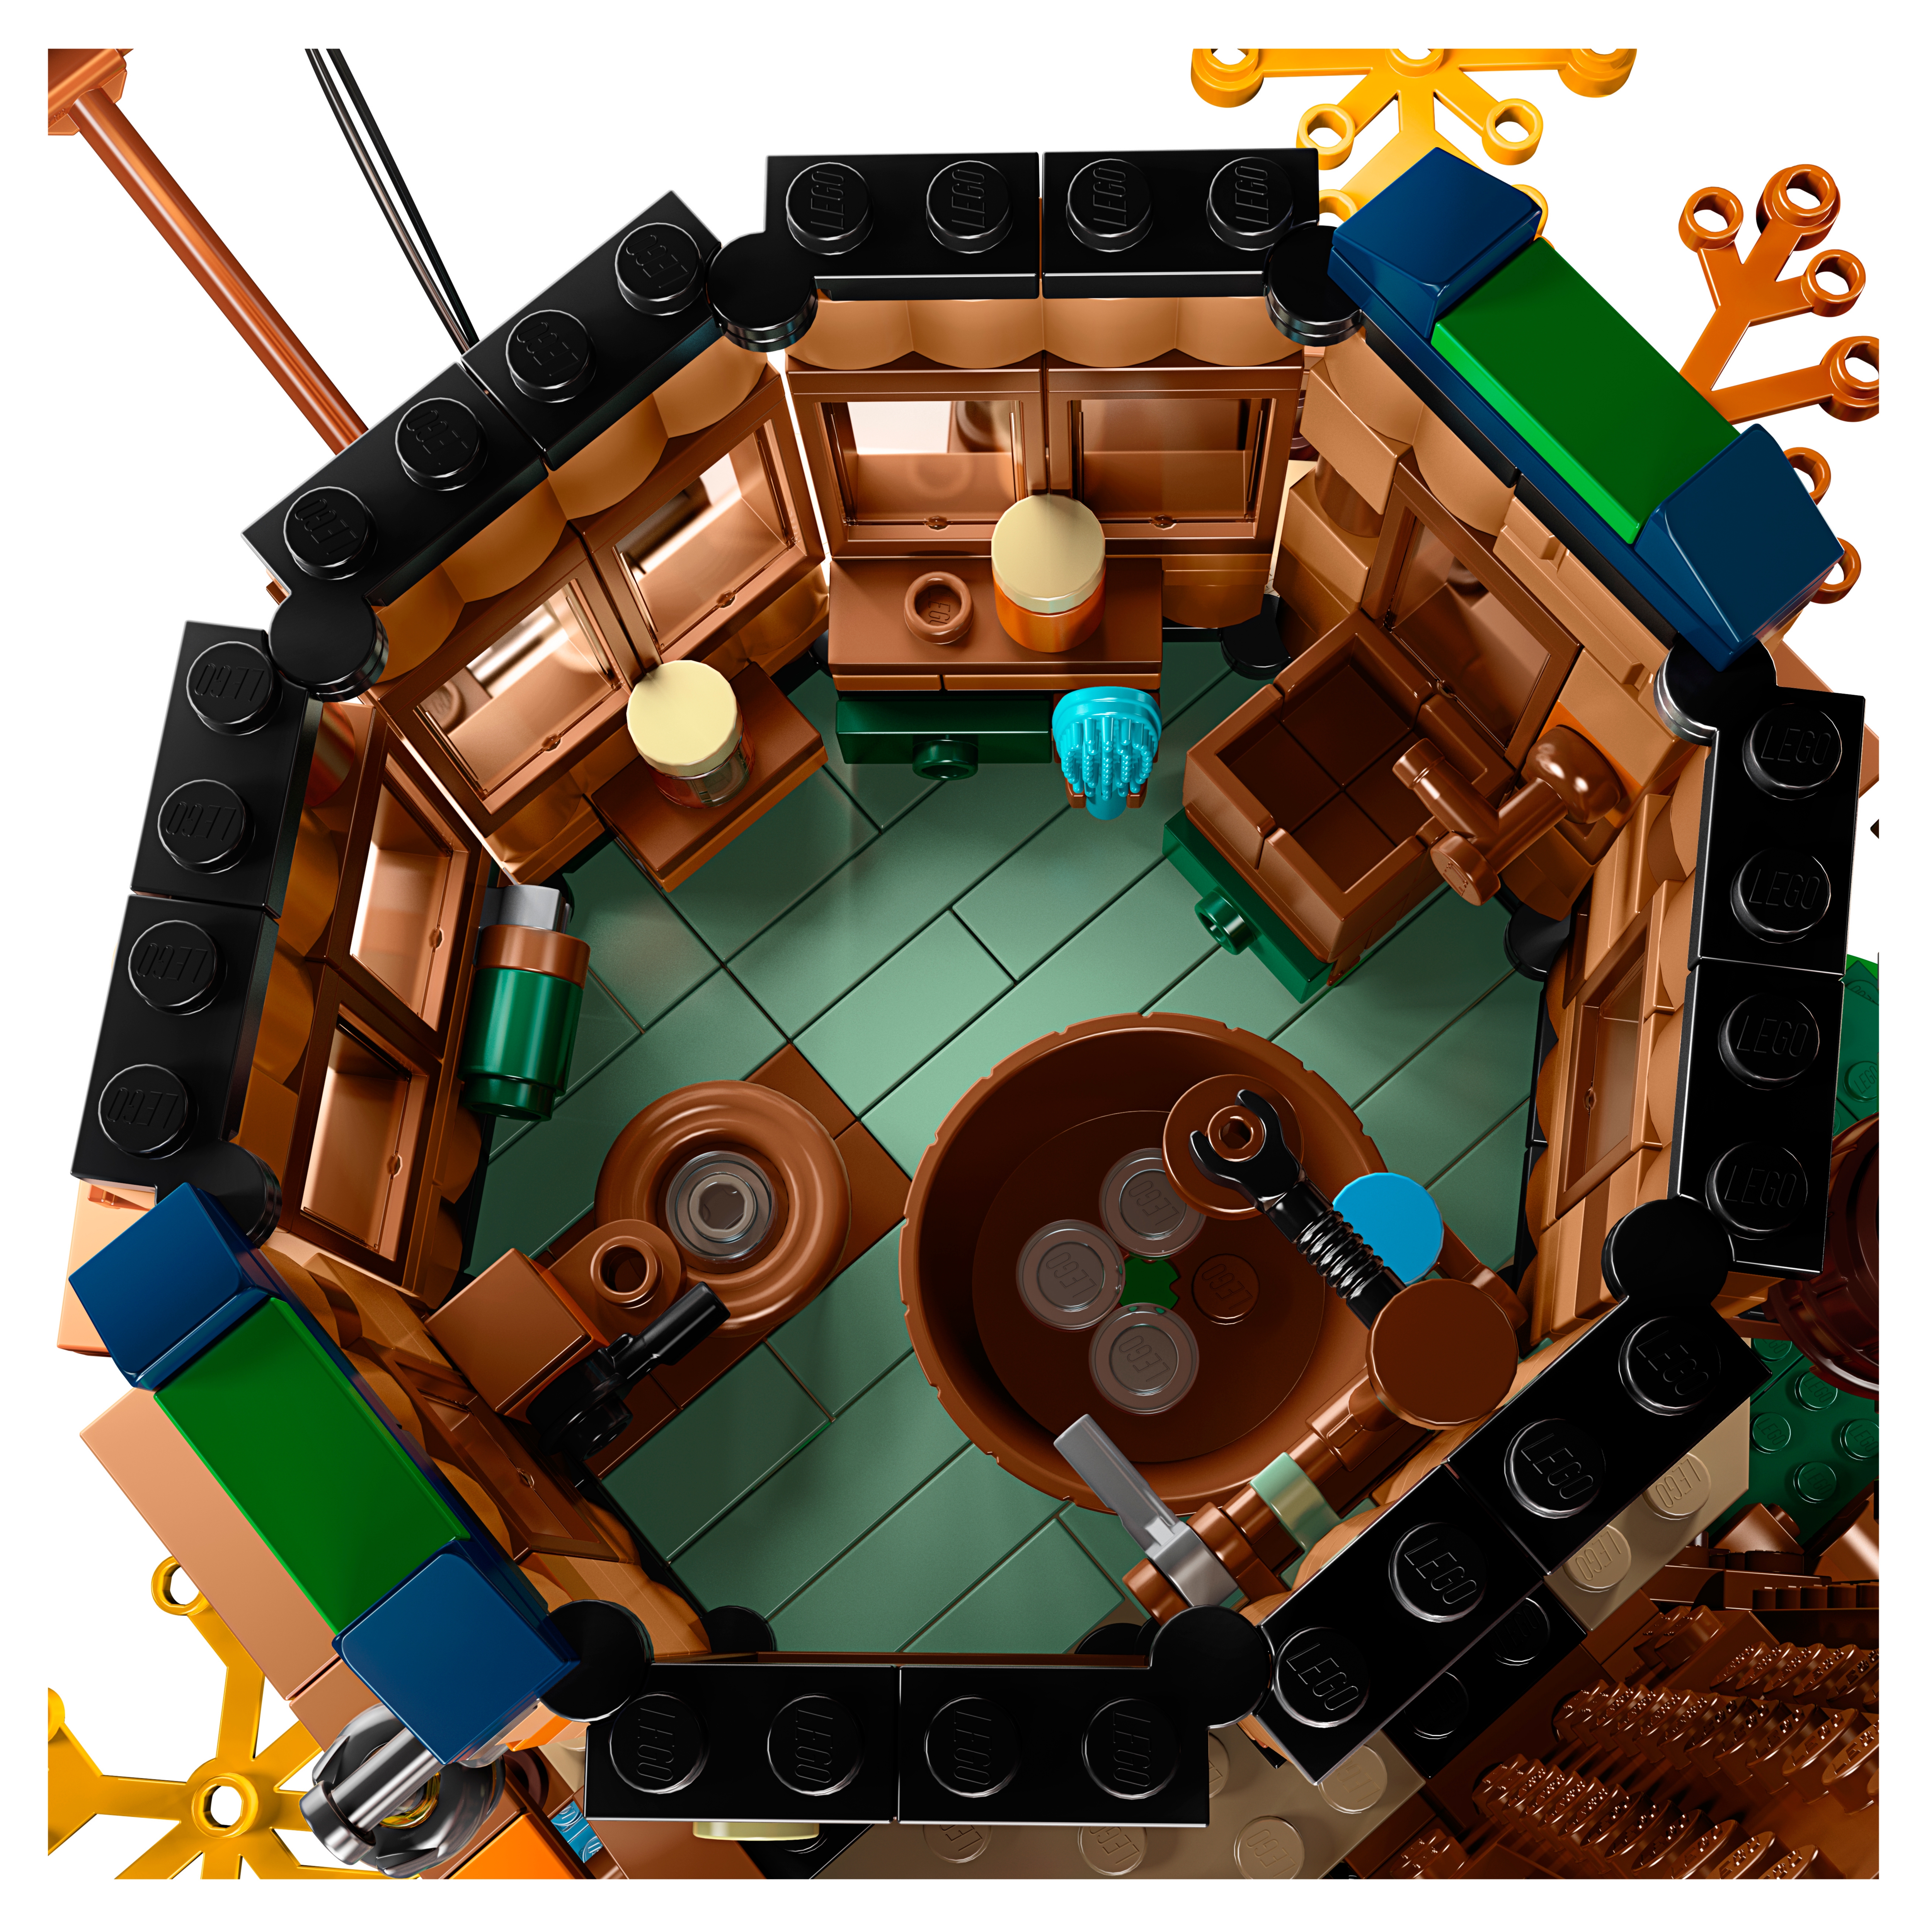 Tree House 21318 | | Buy online at the Official LEGO® Shop US